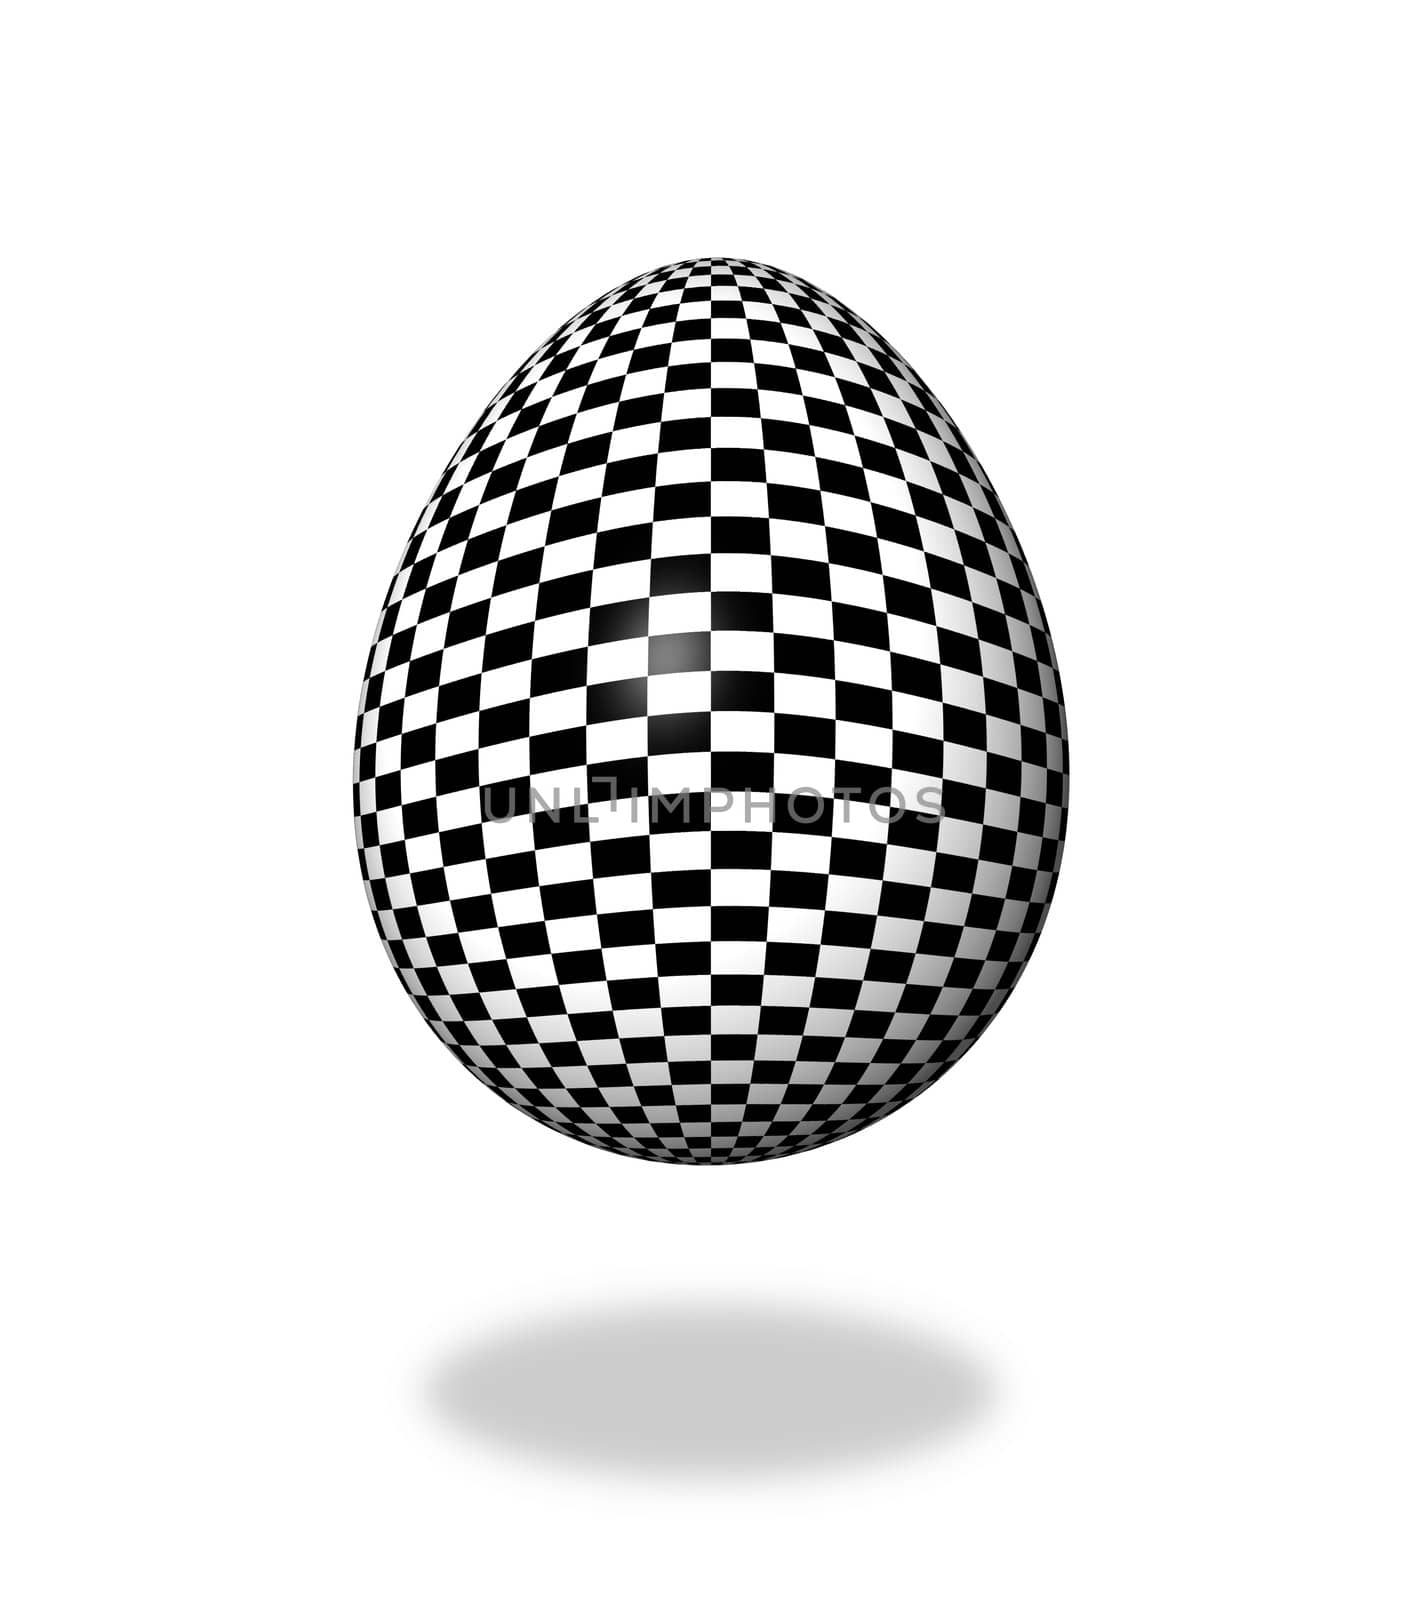 Checkered egg on white background with shadow.